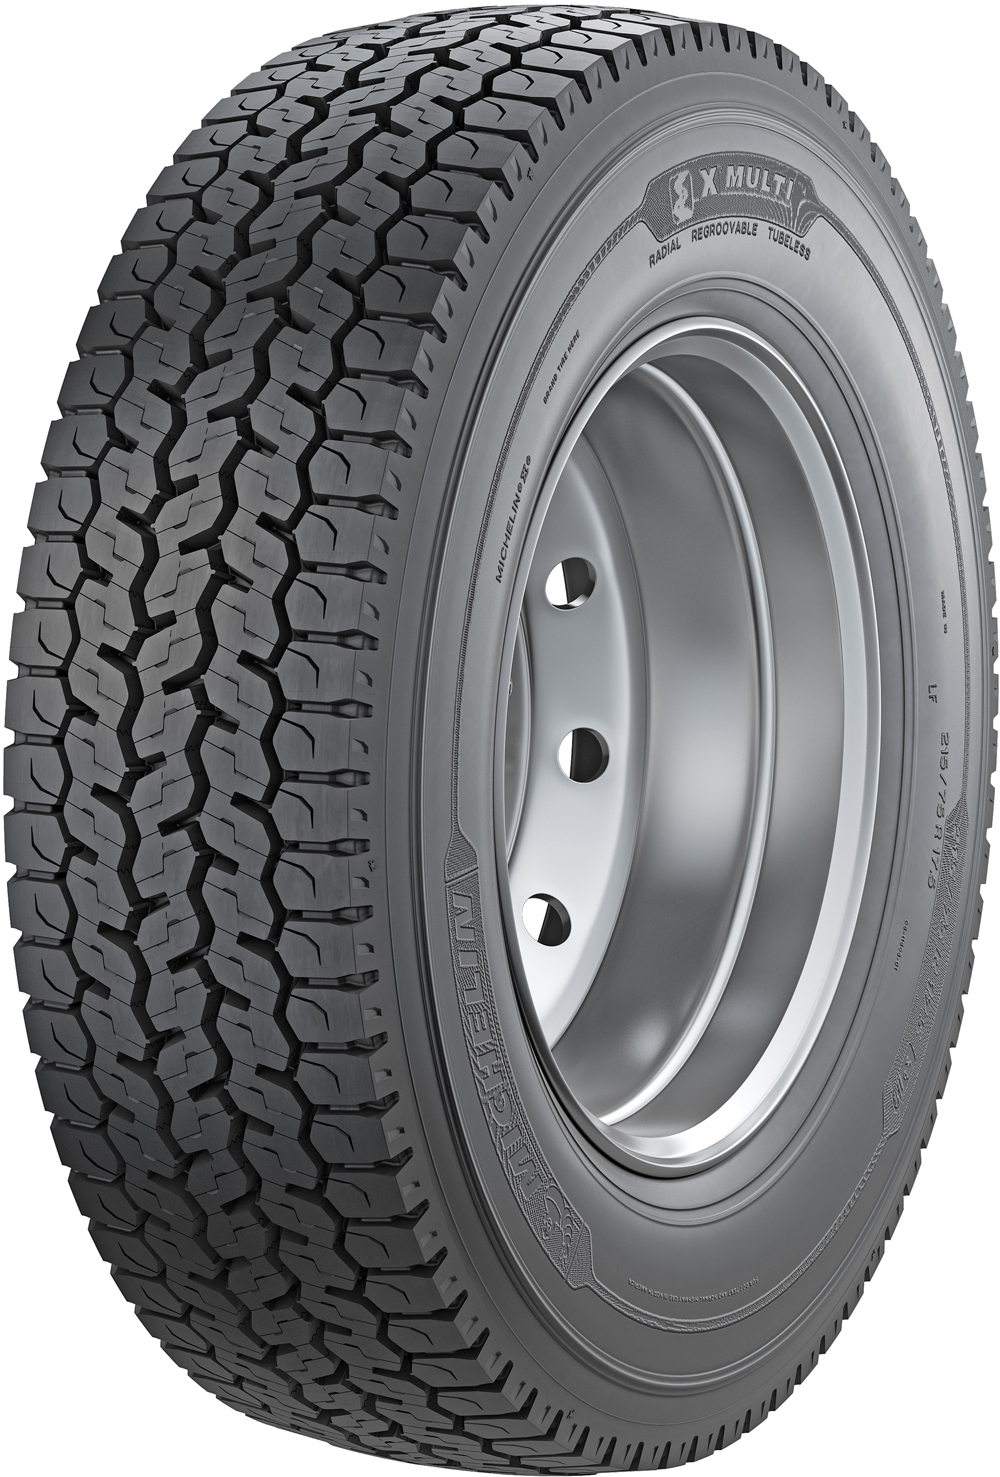 product_type-heavy_tires MICHELIN X MULTI D VG 245/70 R19.5 136M